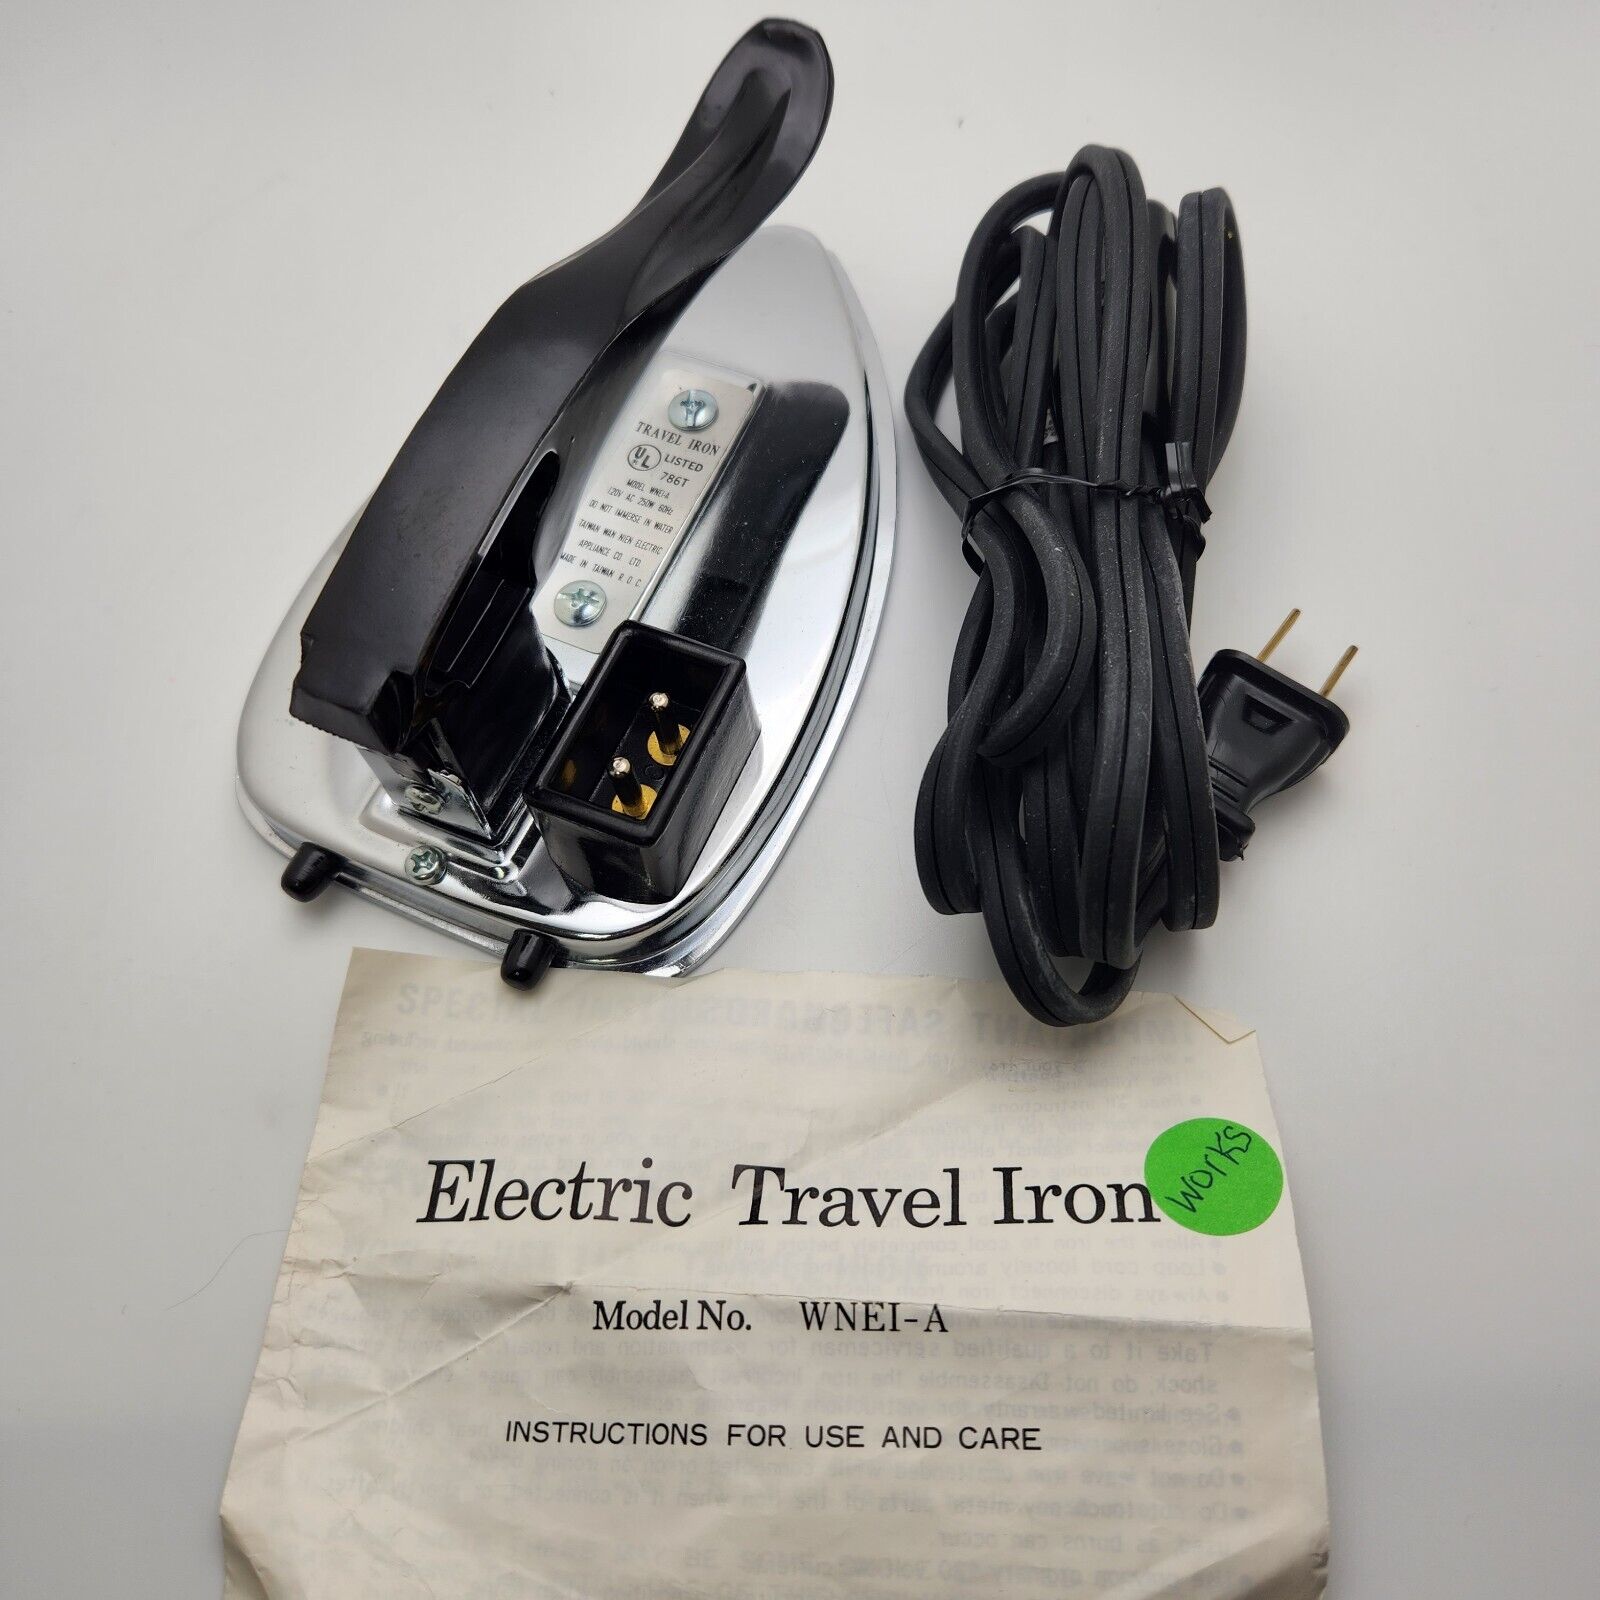 Vintage 1970\'s Folding Travel Iron Model-WNEI-A Stainless Steel Electric 